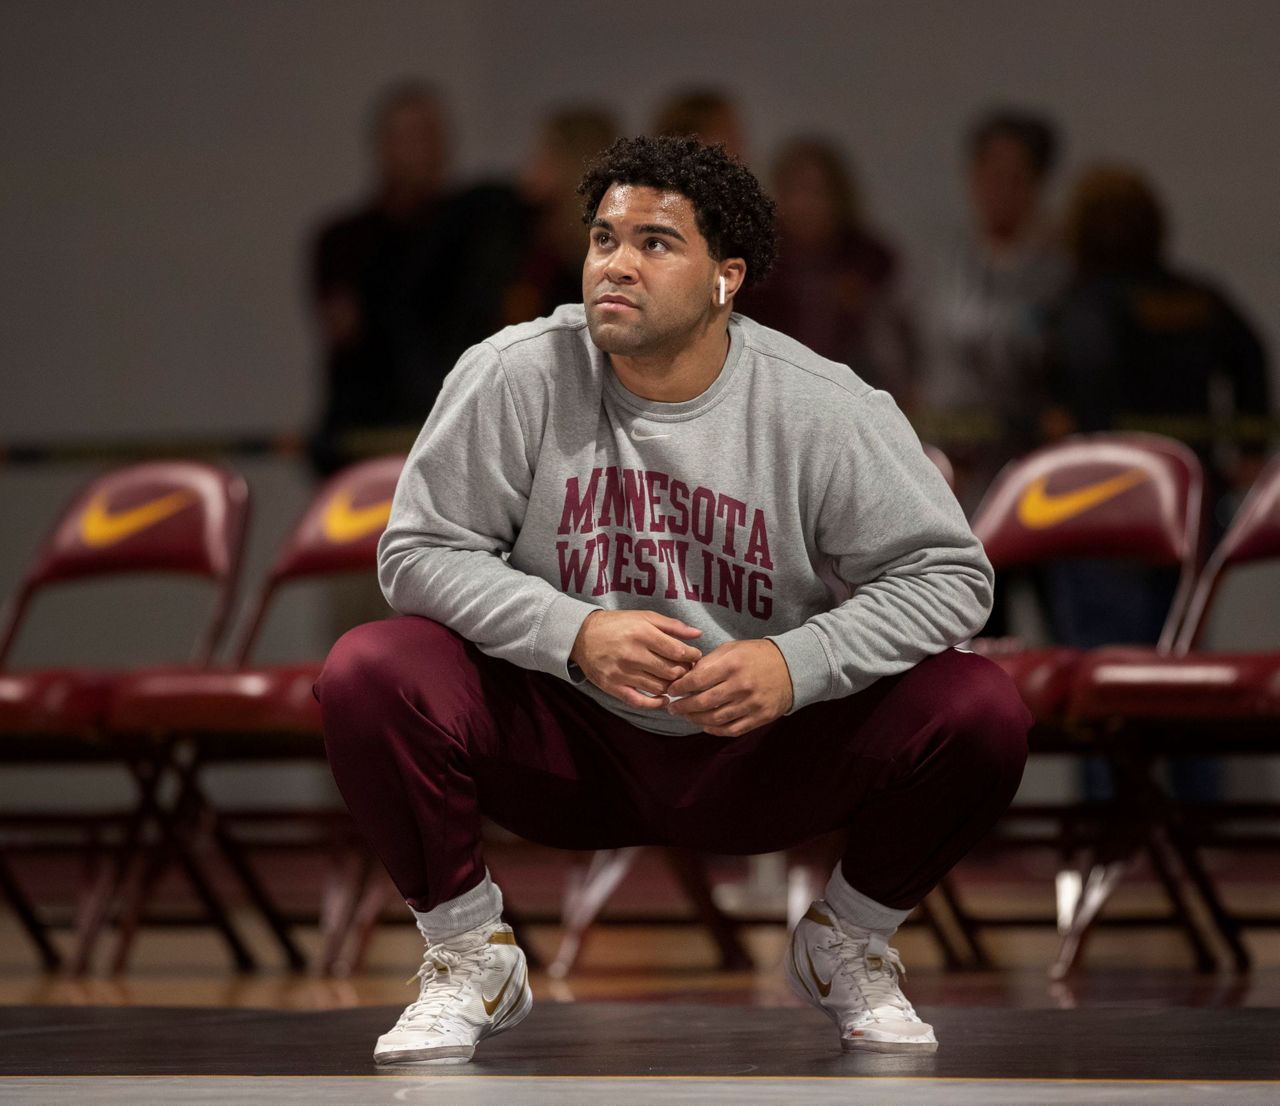 University wrestlers suspected of criminal sexual conduct picture